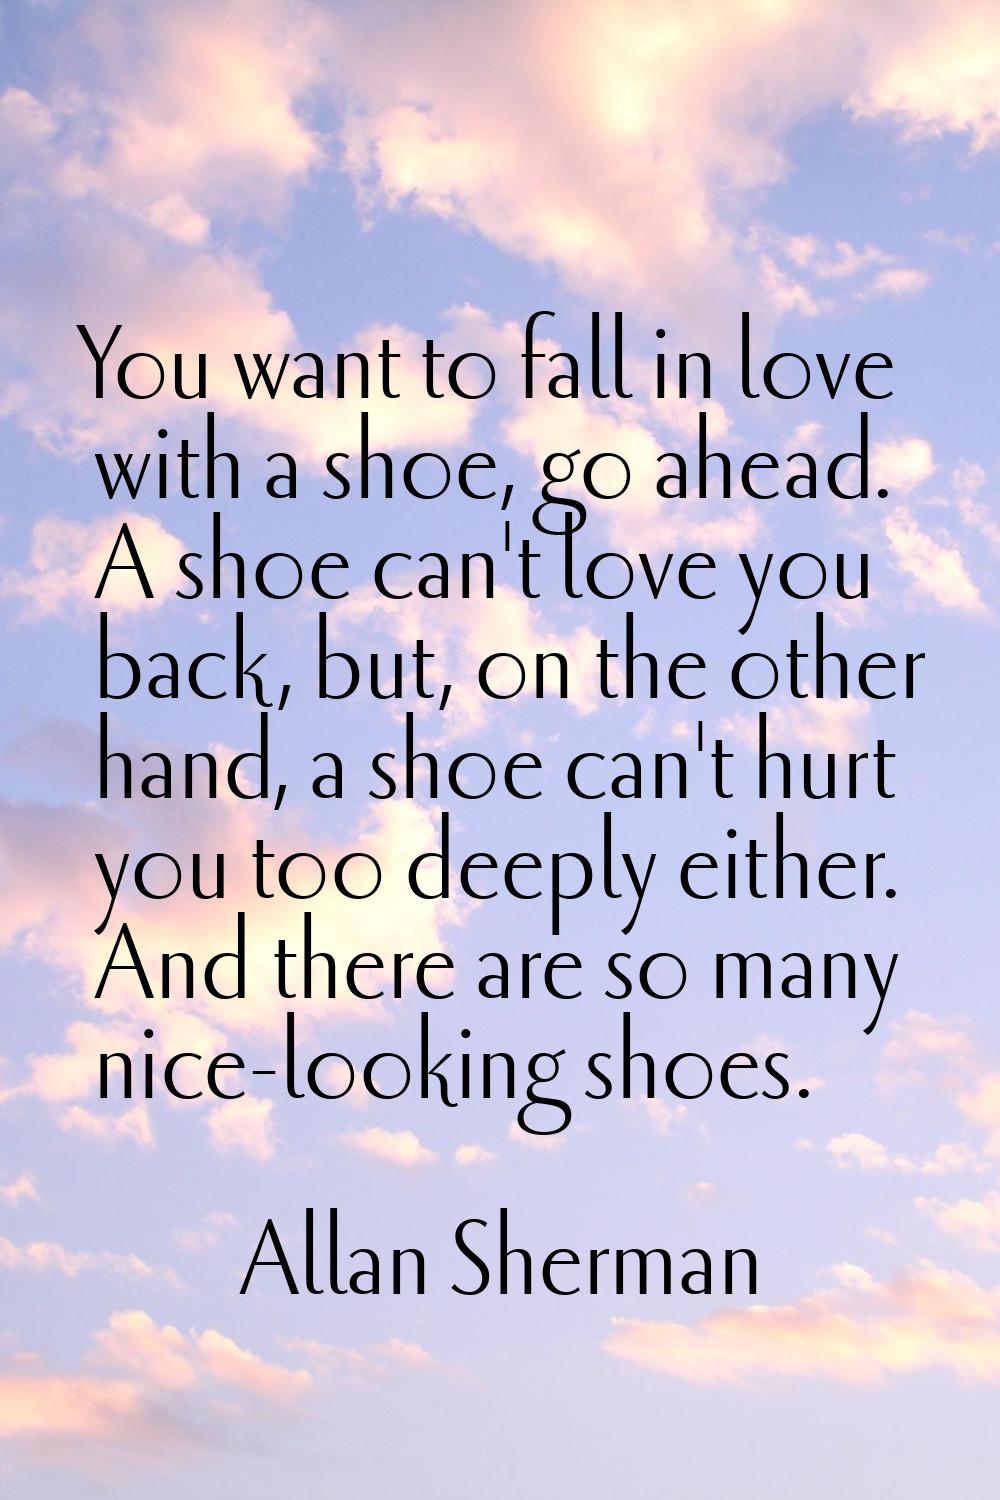 You want to fall in love with a shoe, go ahead. A shoe can't love you back, but, on the other hand,